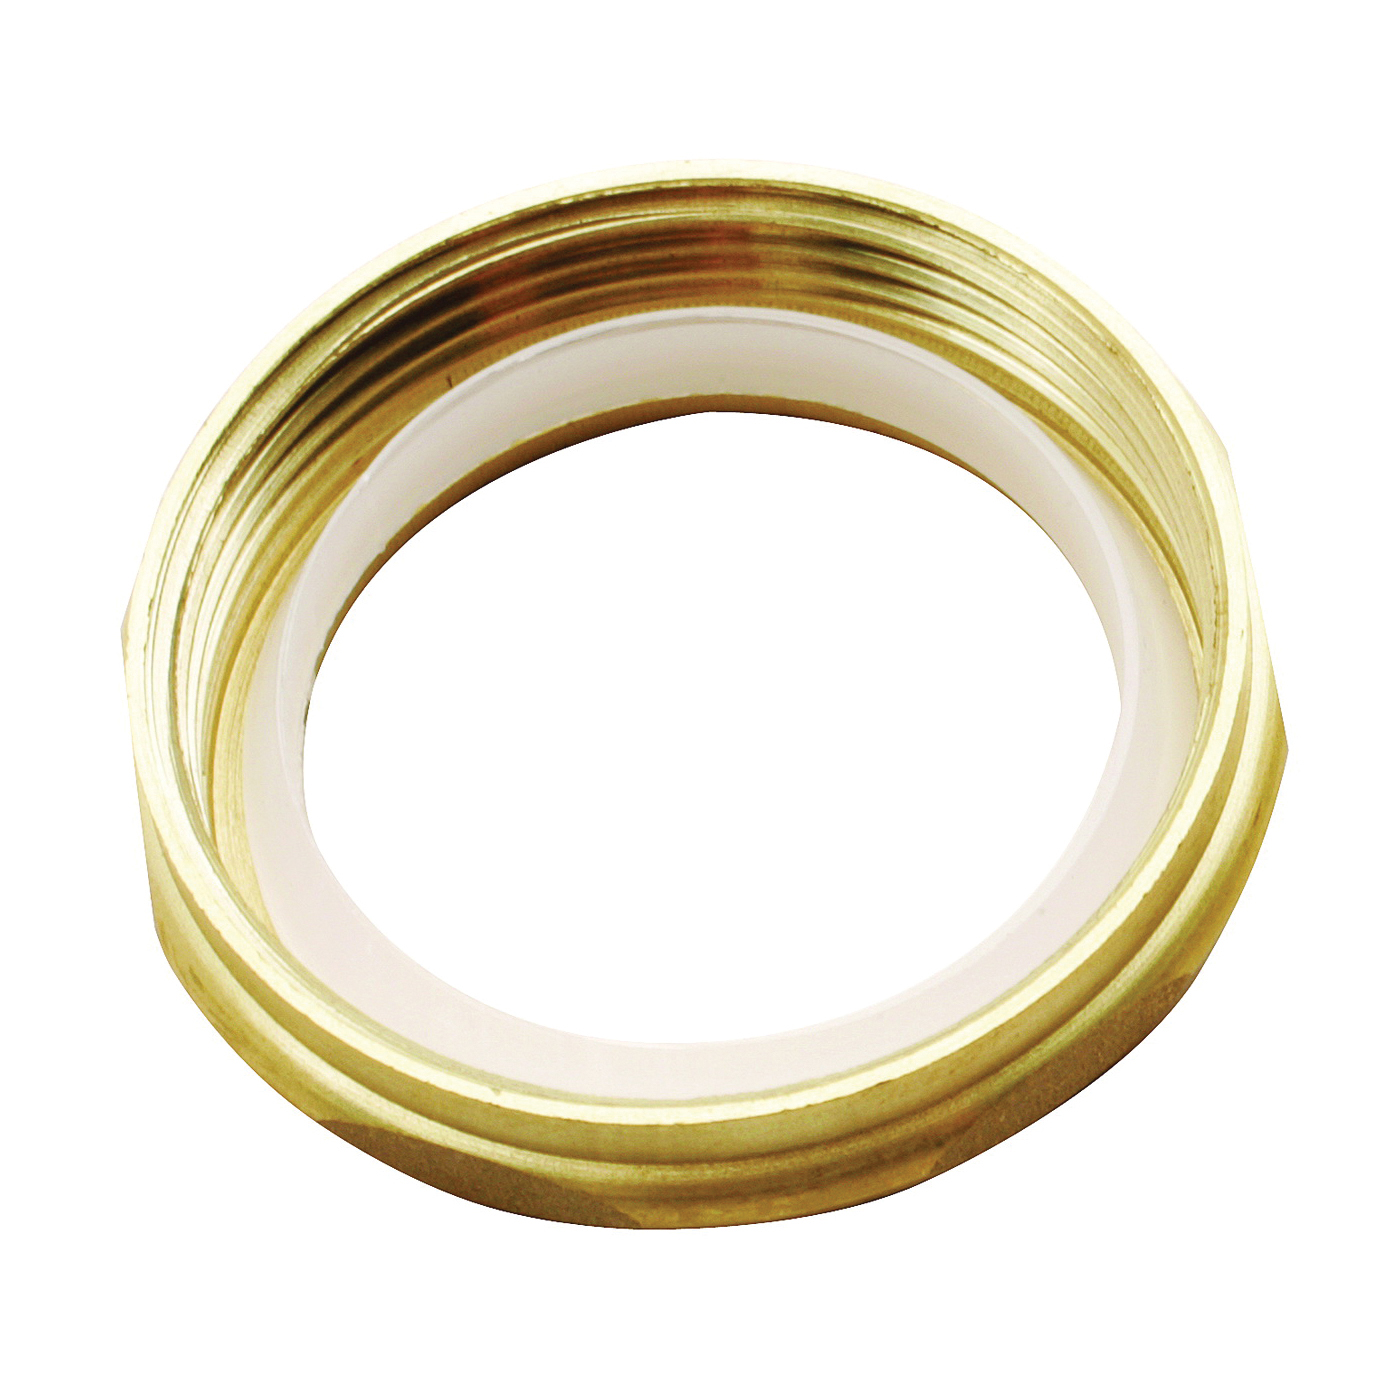 PP809-18 Nut with Washer, 1-1/2 x 1-1/2 in, Brass